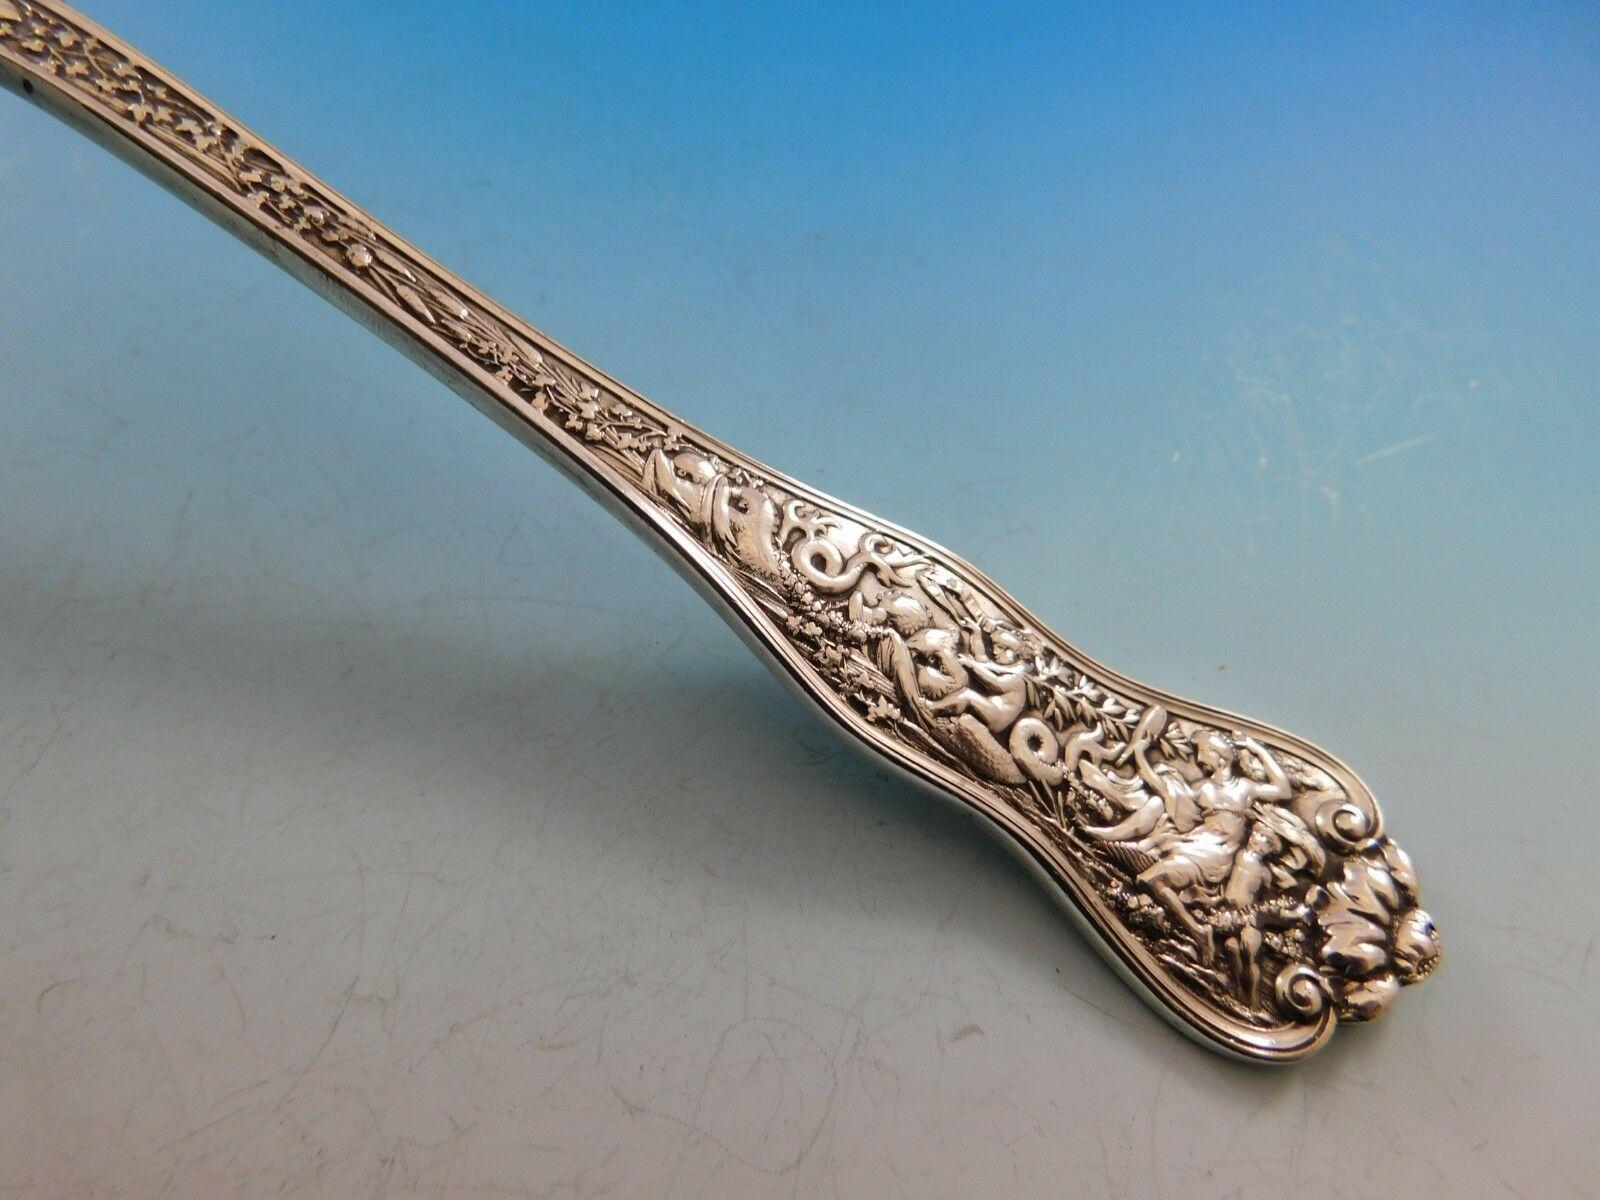 Stunning sterling silver pea spoon measuring 9